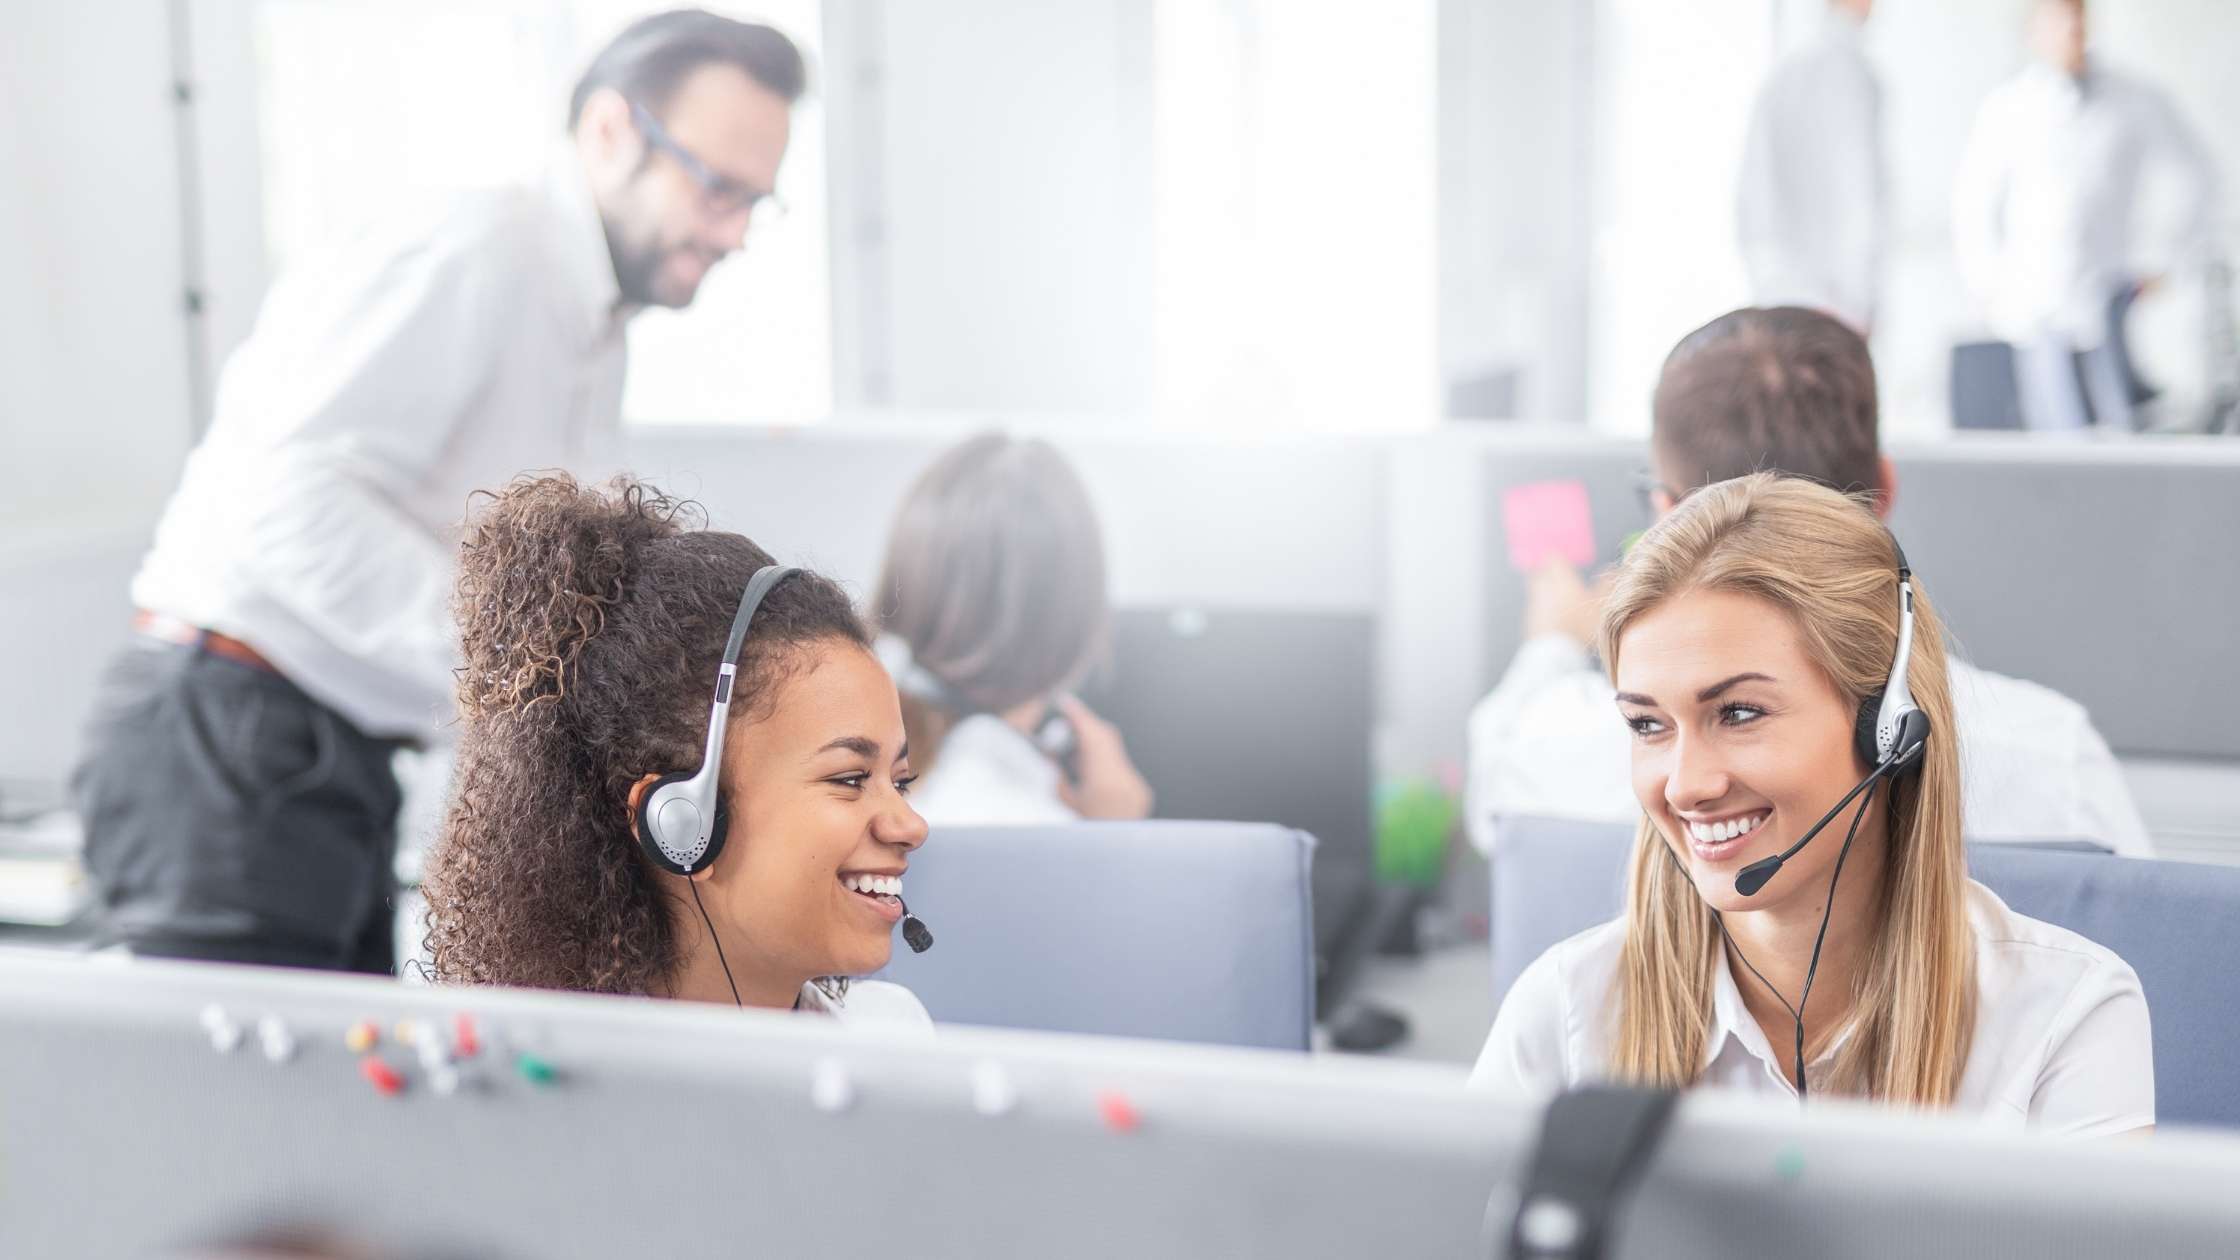 What is Contact Center Workforce Management?